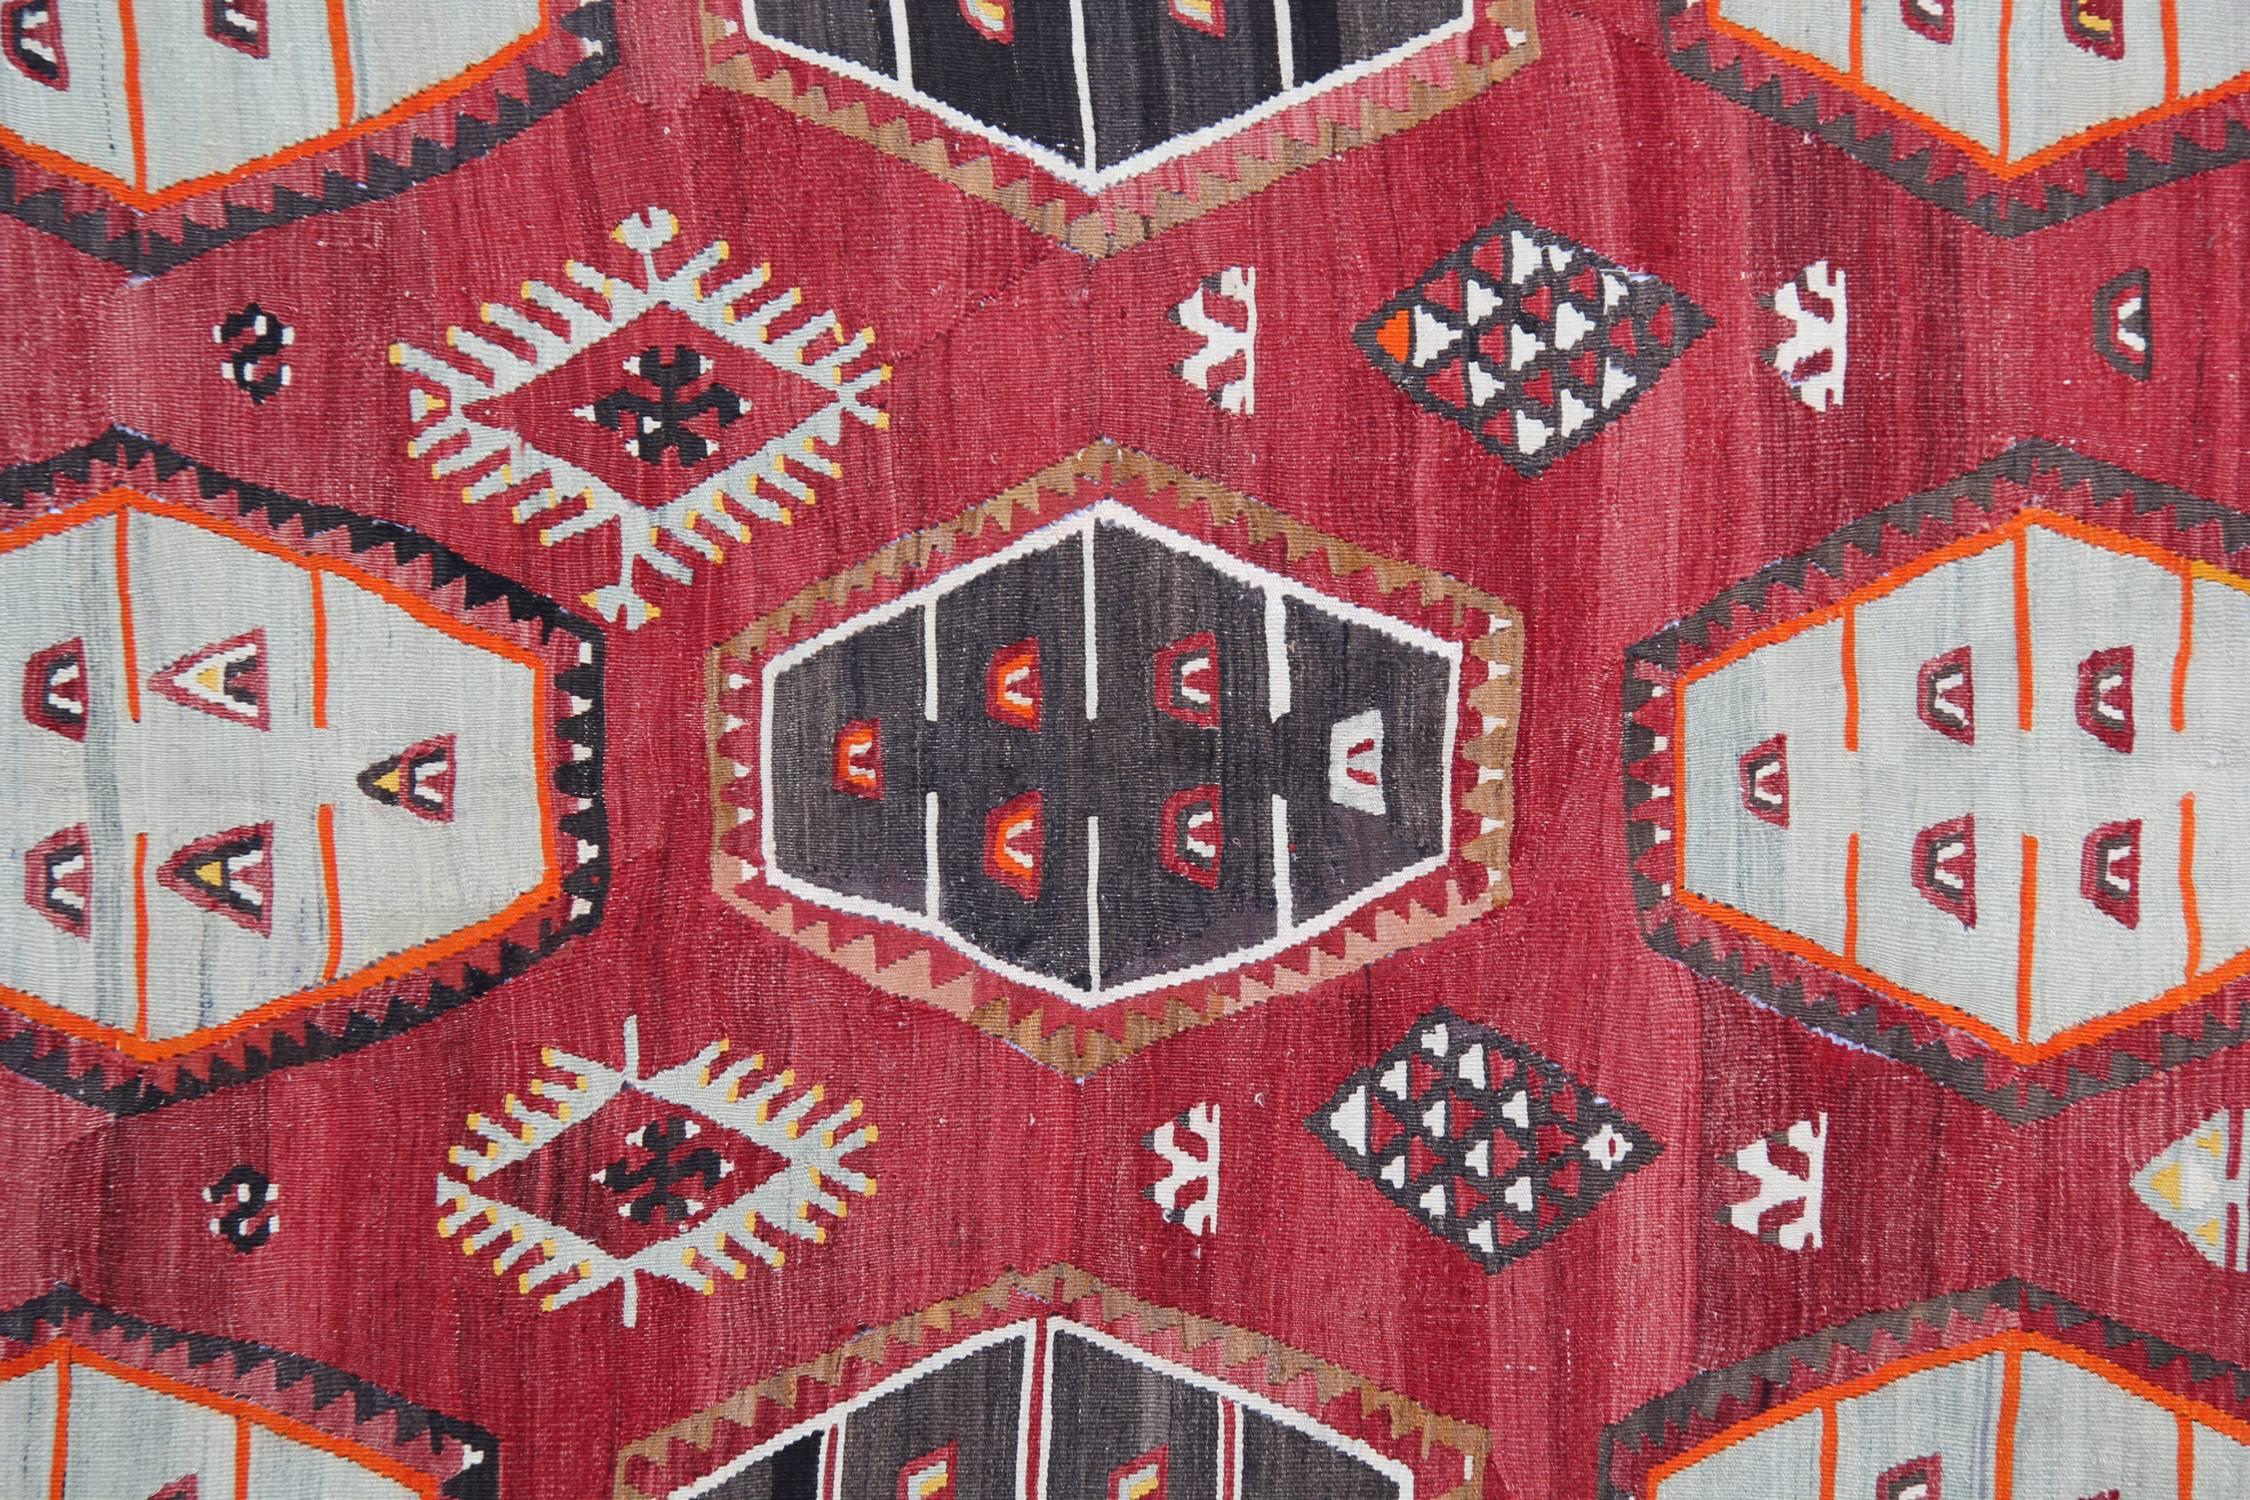 Hand-Knotted Antique Rugs, Red Kilim Rugs Sarkisla Carpet Turkish Rugs for Sale For Sale